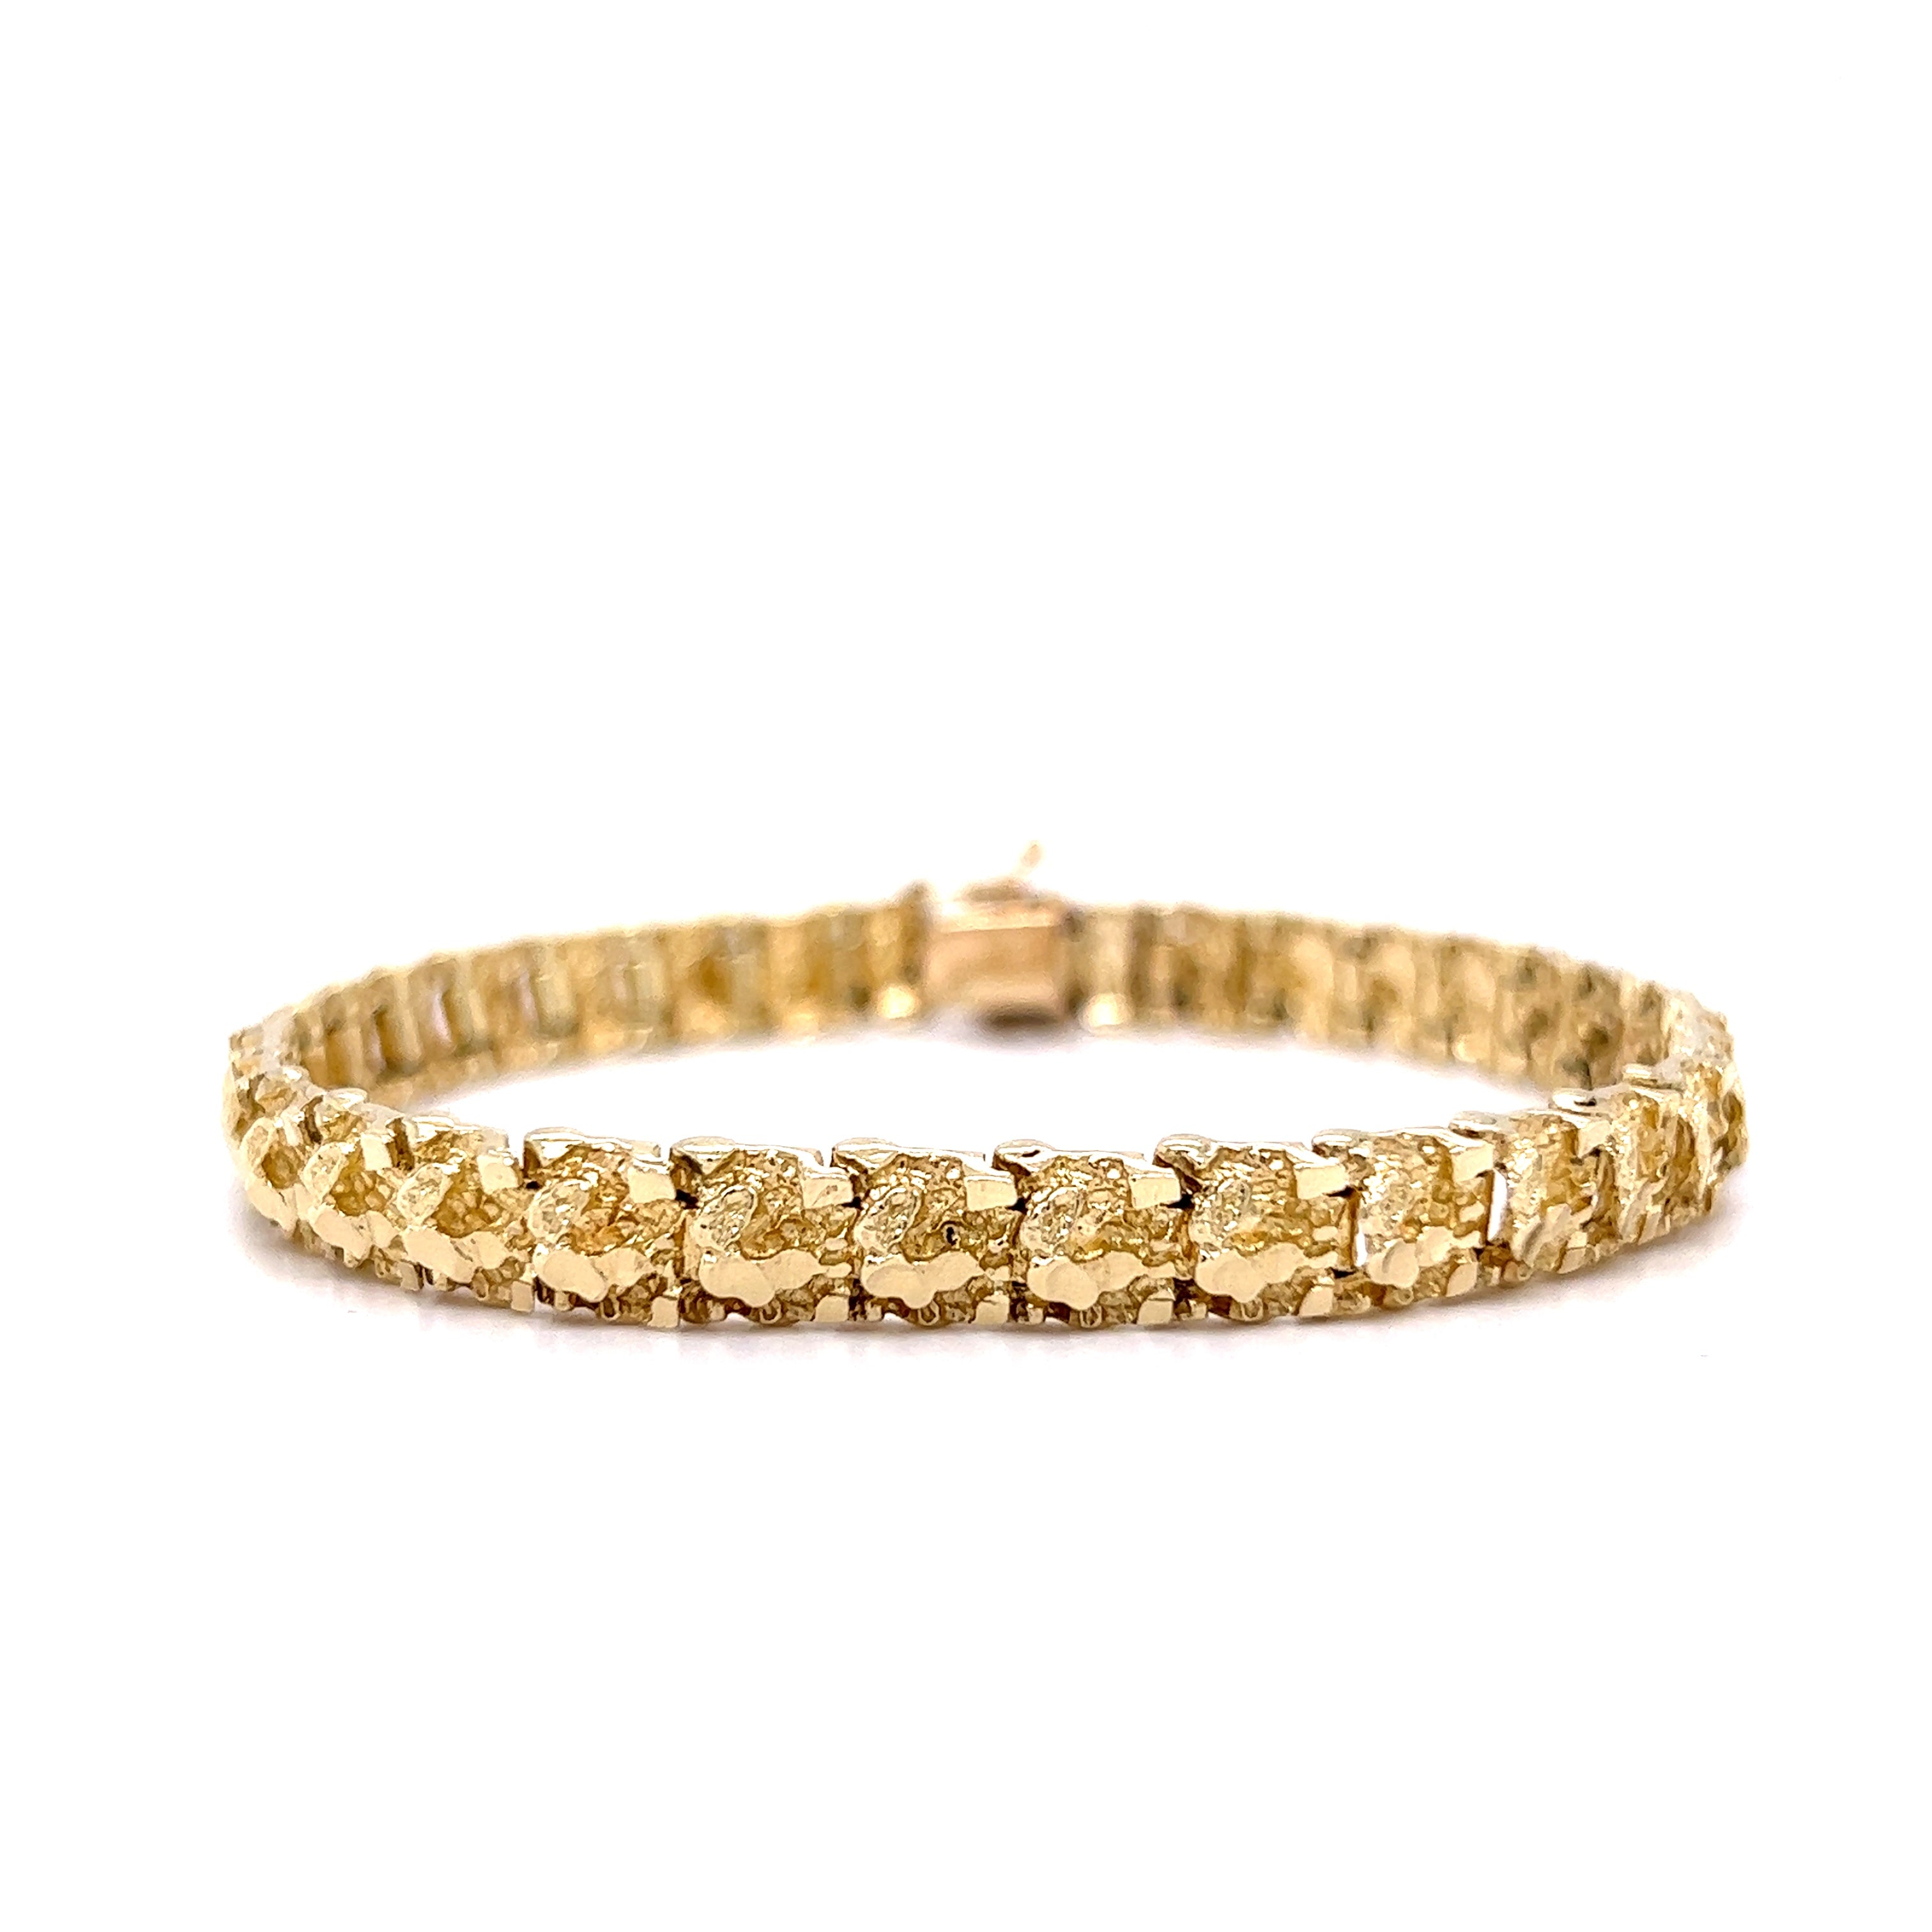 14mm Gold-Tone Stainless Steel Curb Chain Bracelet | In stock! | Lucleon |  Stainless steel curb chain, Gold, Chain bracelet